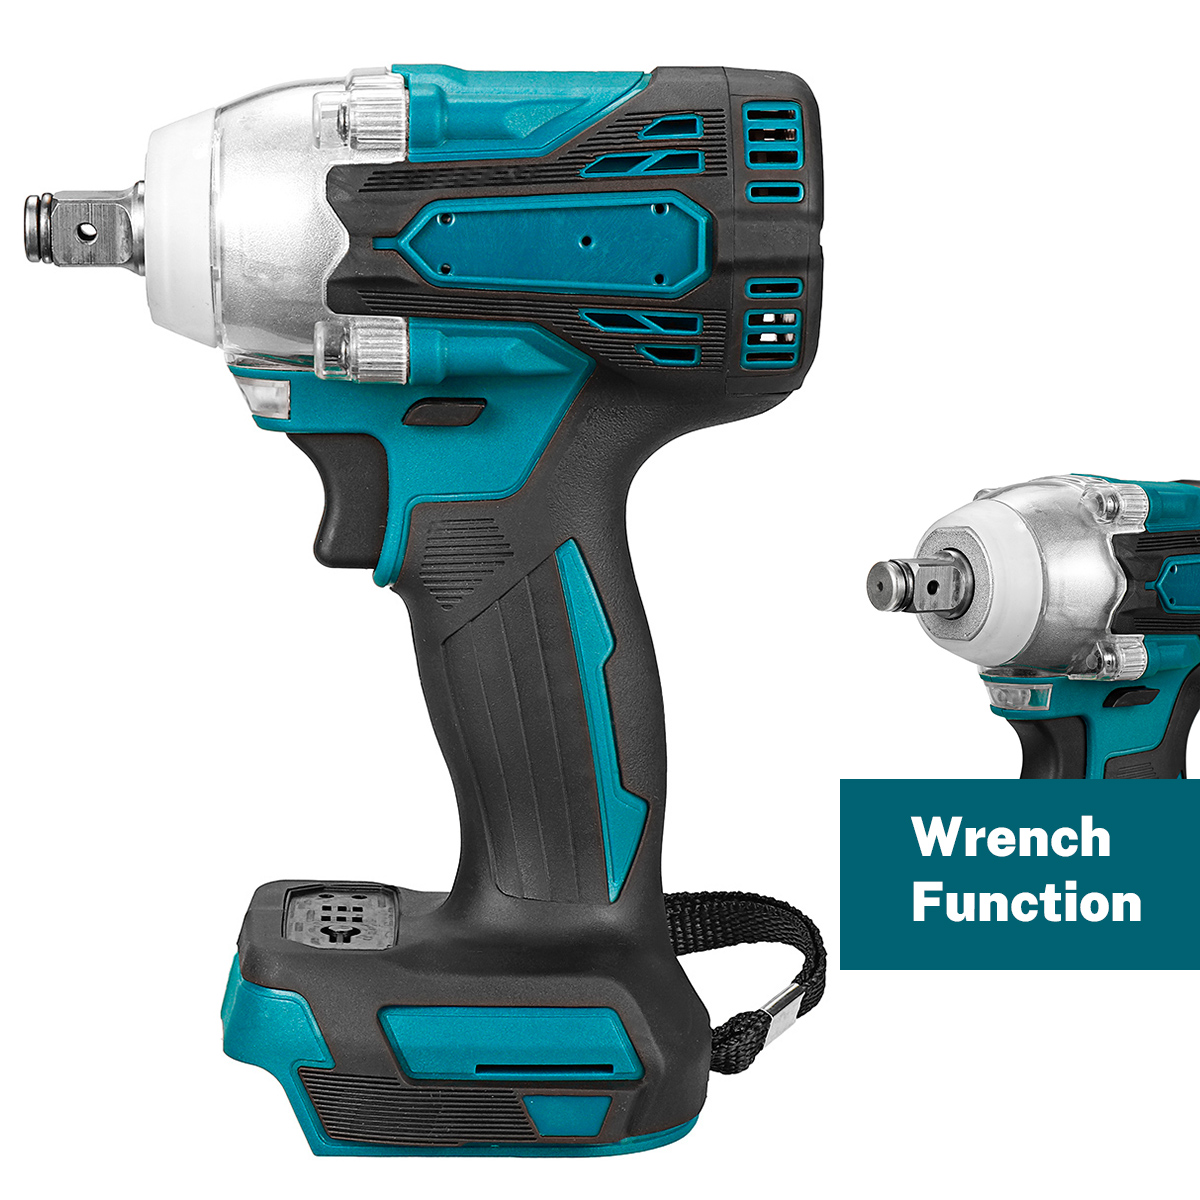 125mm-Cordless-Brushless-Impact-Wrench-Drill-Drive-Screwdriver-Power-Tool-For-Makita-18V-battery-1855969-8